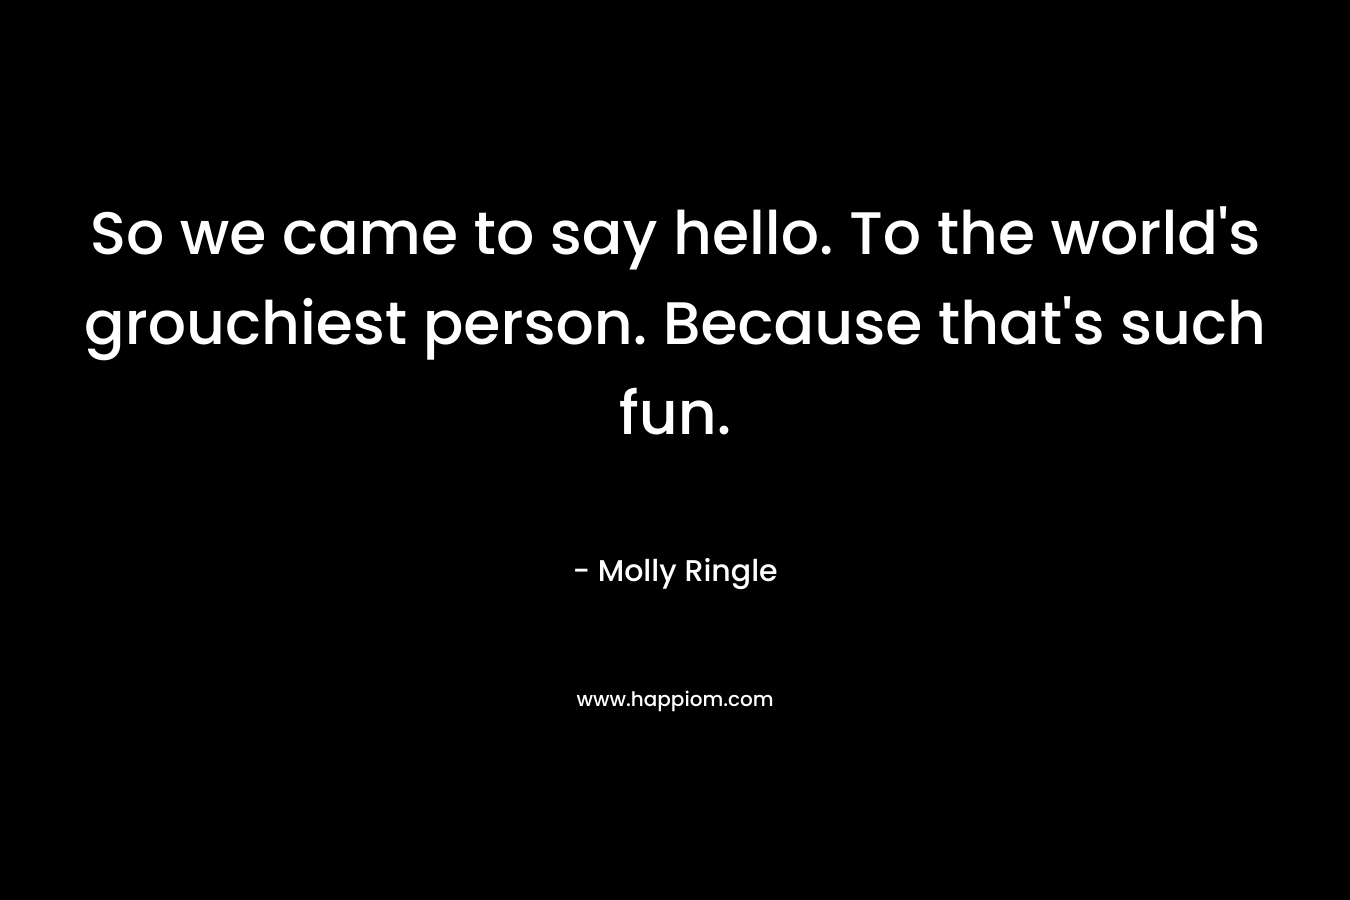 So we came to say hello. To the world’s grouchiest person. Because that’s such fun. – Molly Ringle